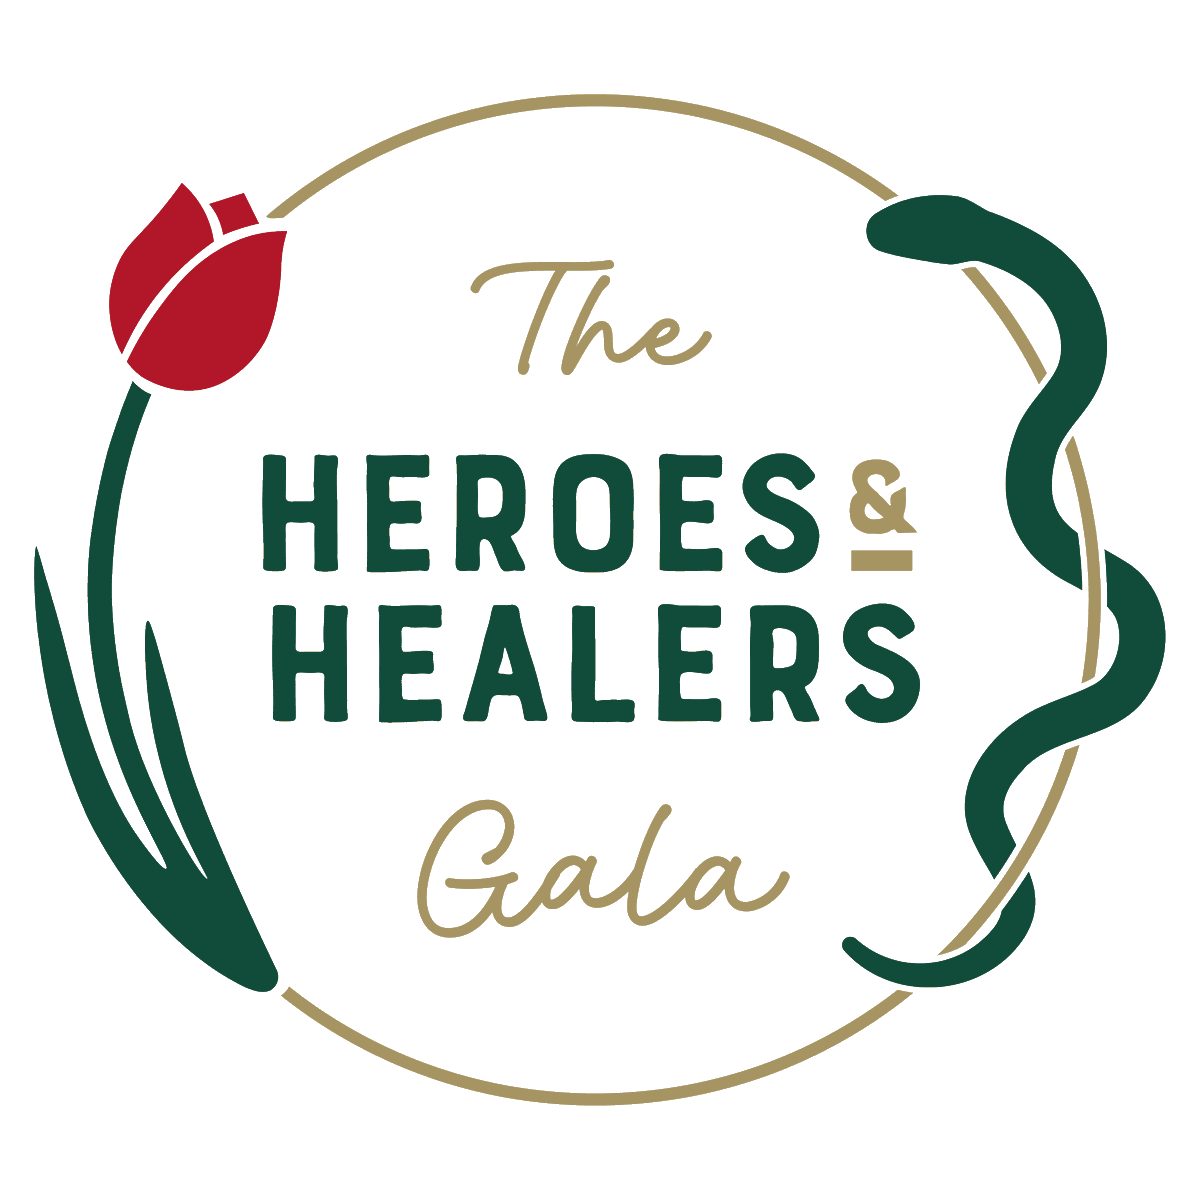 We're counting down the days until @UABTrauma's Heroes and Healers Gala! Join us as we recognize and celebrate survivors of traumatic injury and their families, as well as the first responders and healthcare professionals who saved their lives. RSVP: sites.uab.edu/heroeshealersg…!